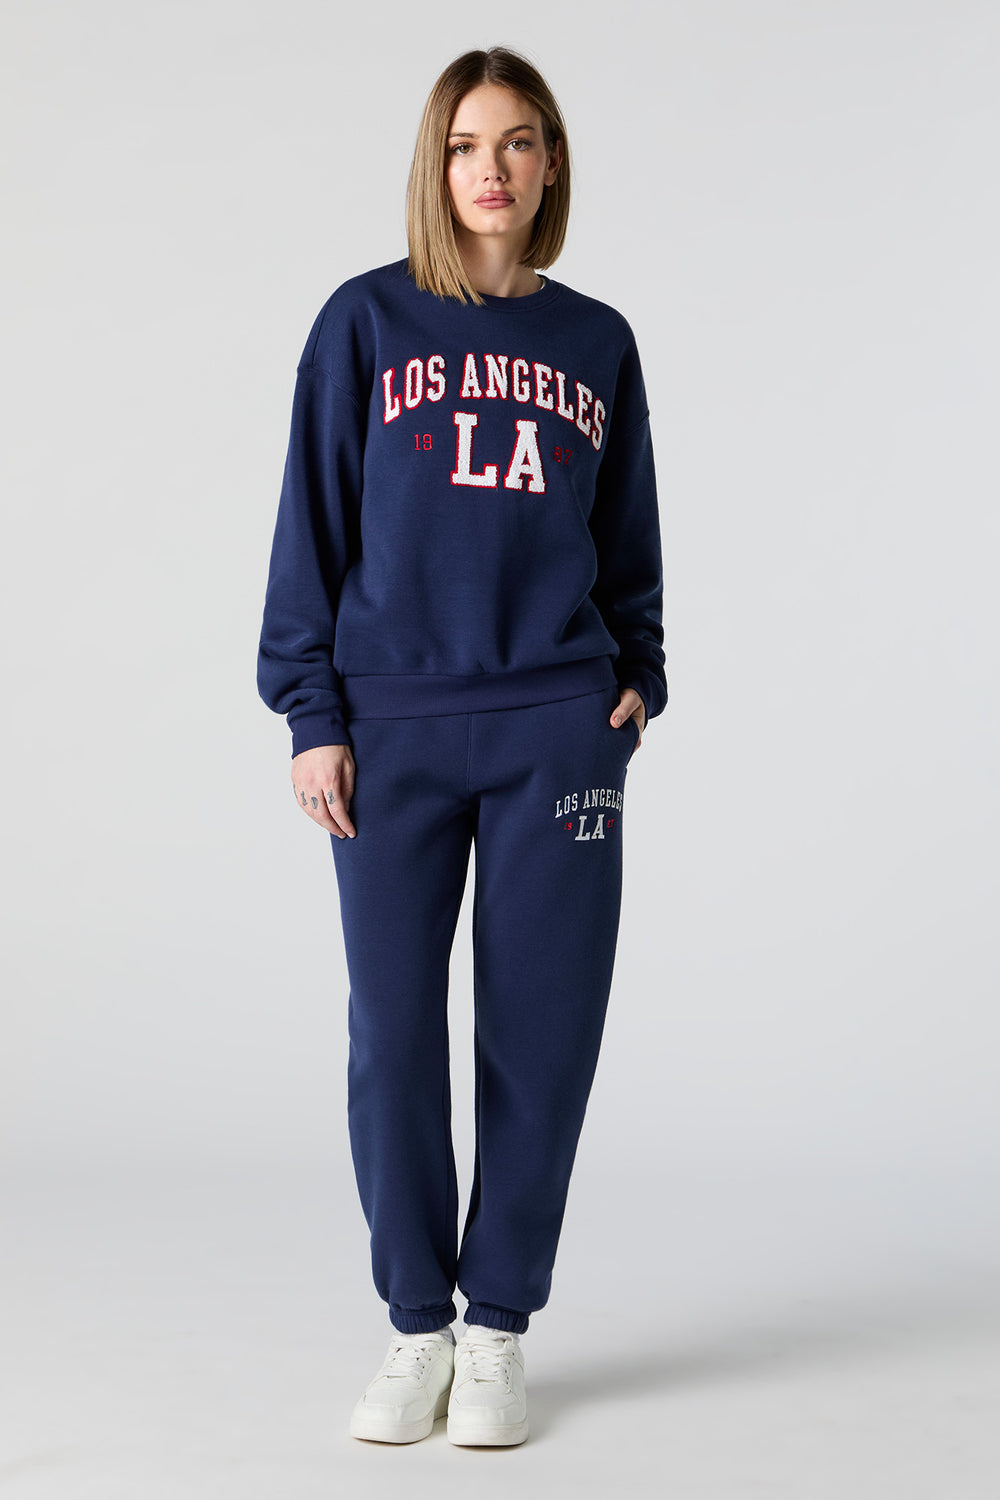 Los Angeles Embroidered Fleece Everyday Jogger Los Angeles Embroidered Fleece Everyday Jogger 1